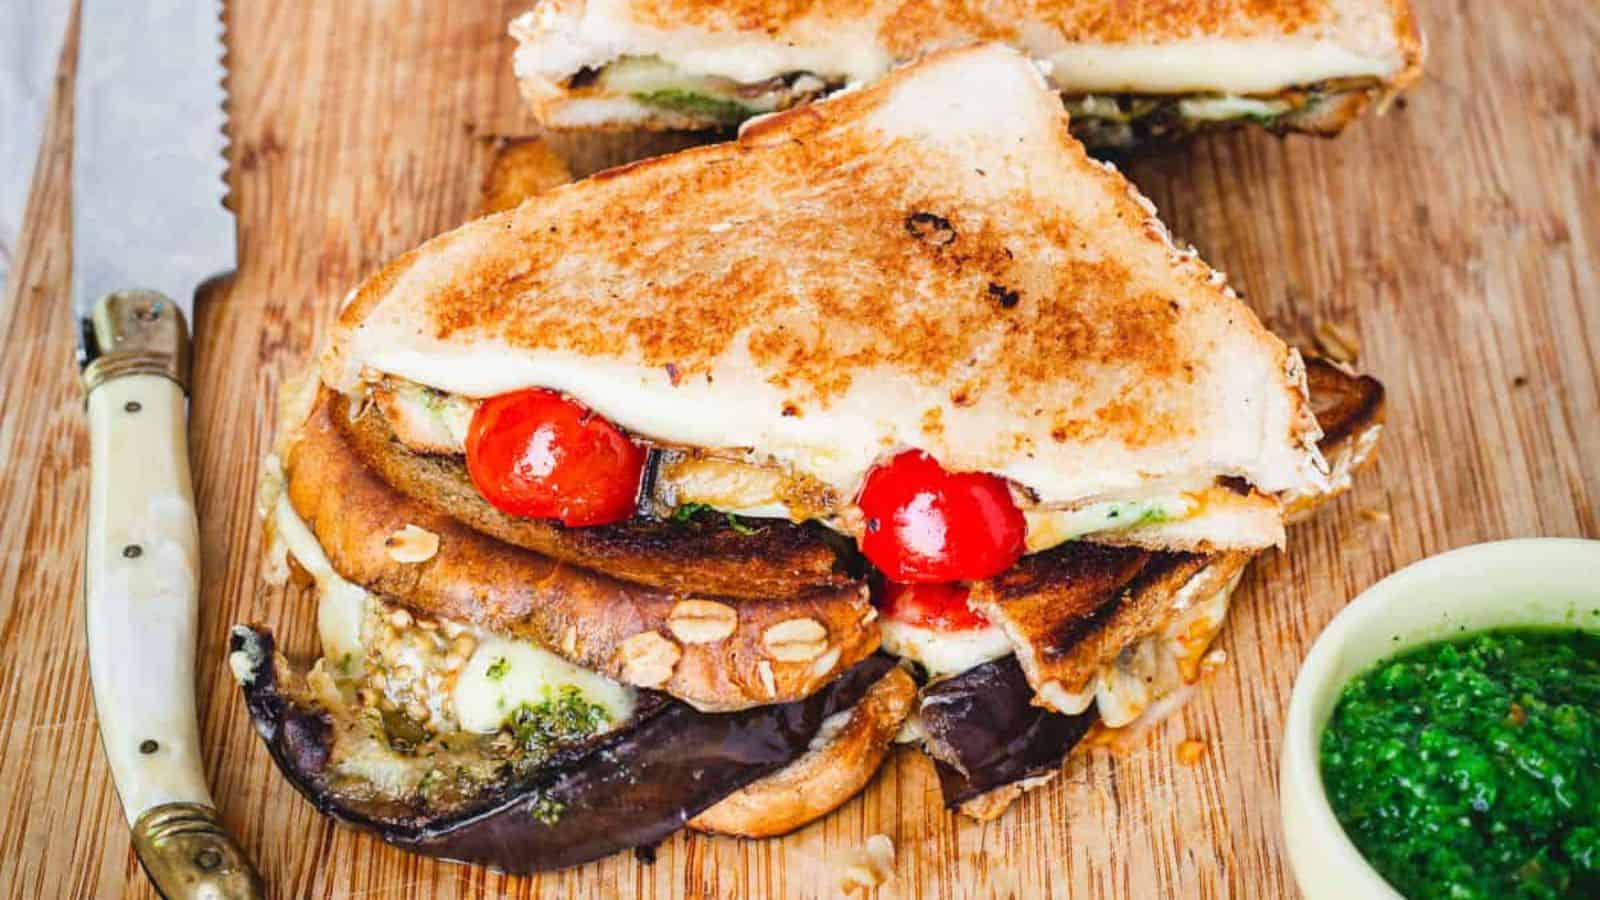 A grilled sandwich with mushrooms, tomatoes and pesto on a cutting board.